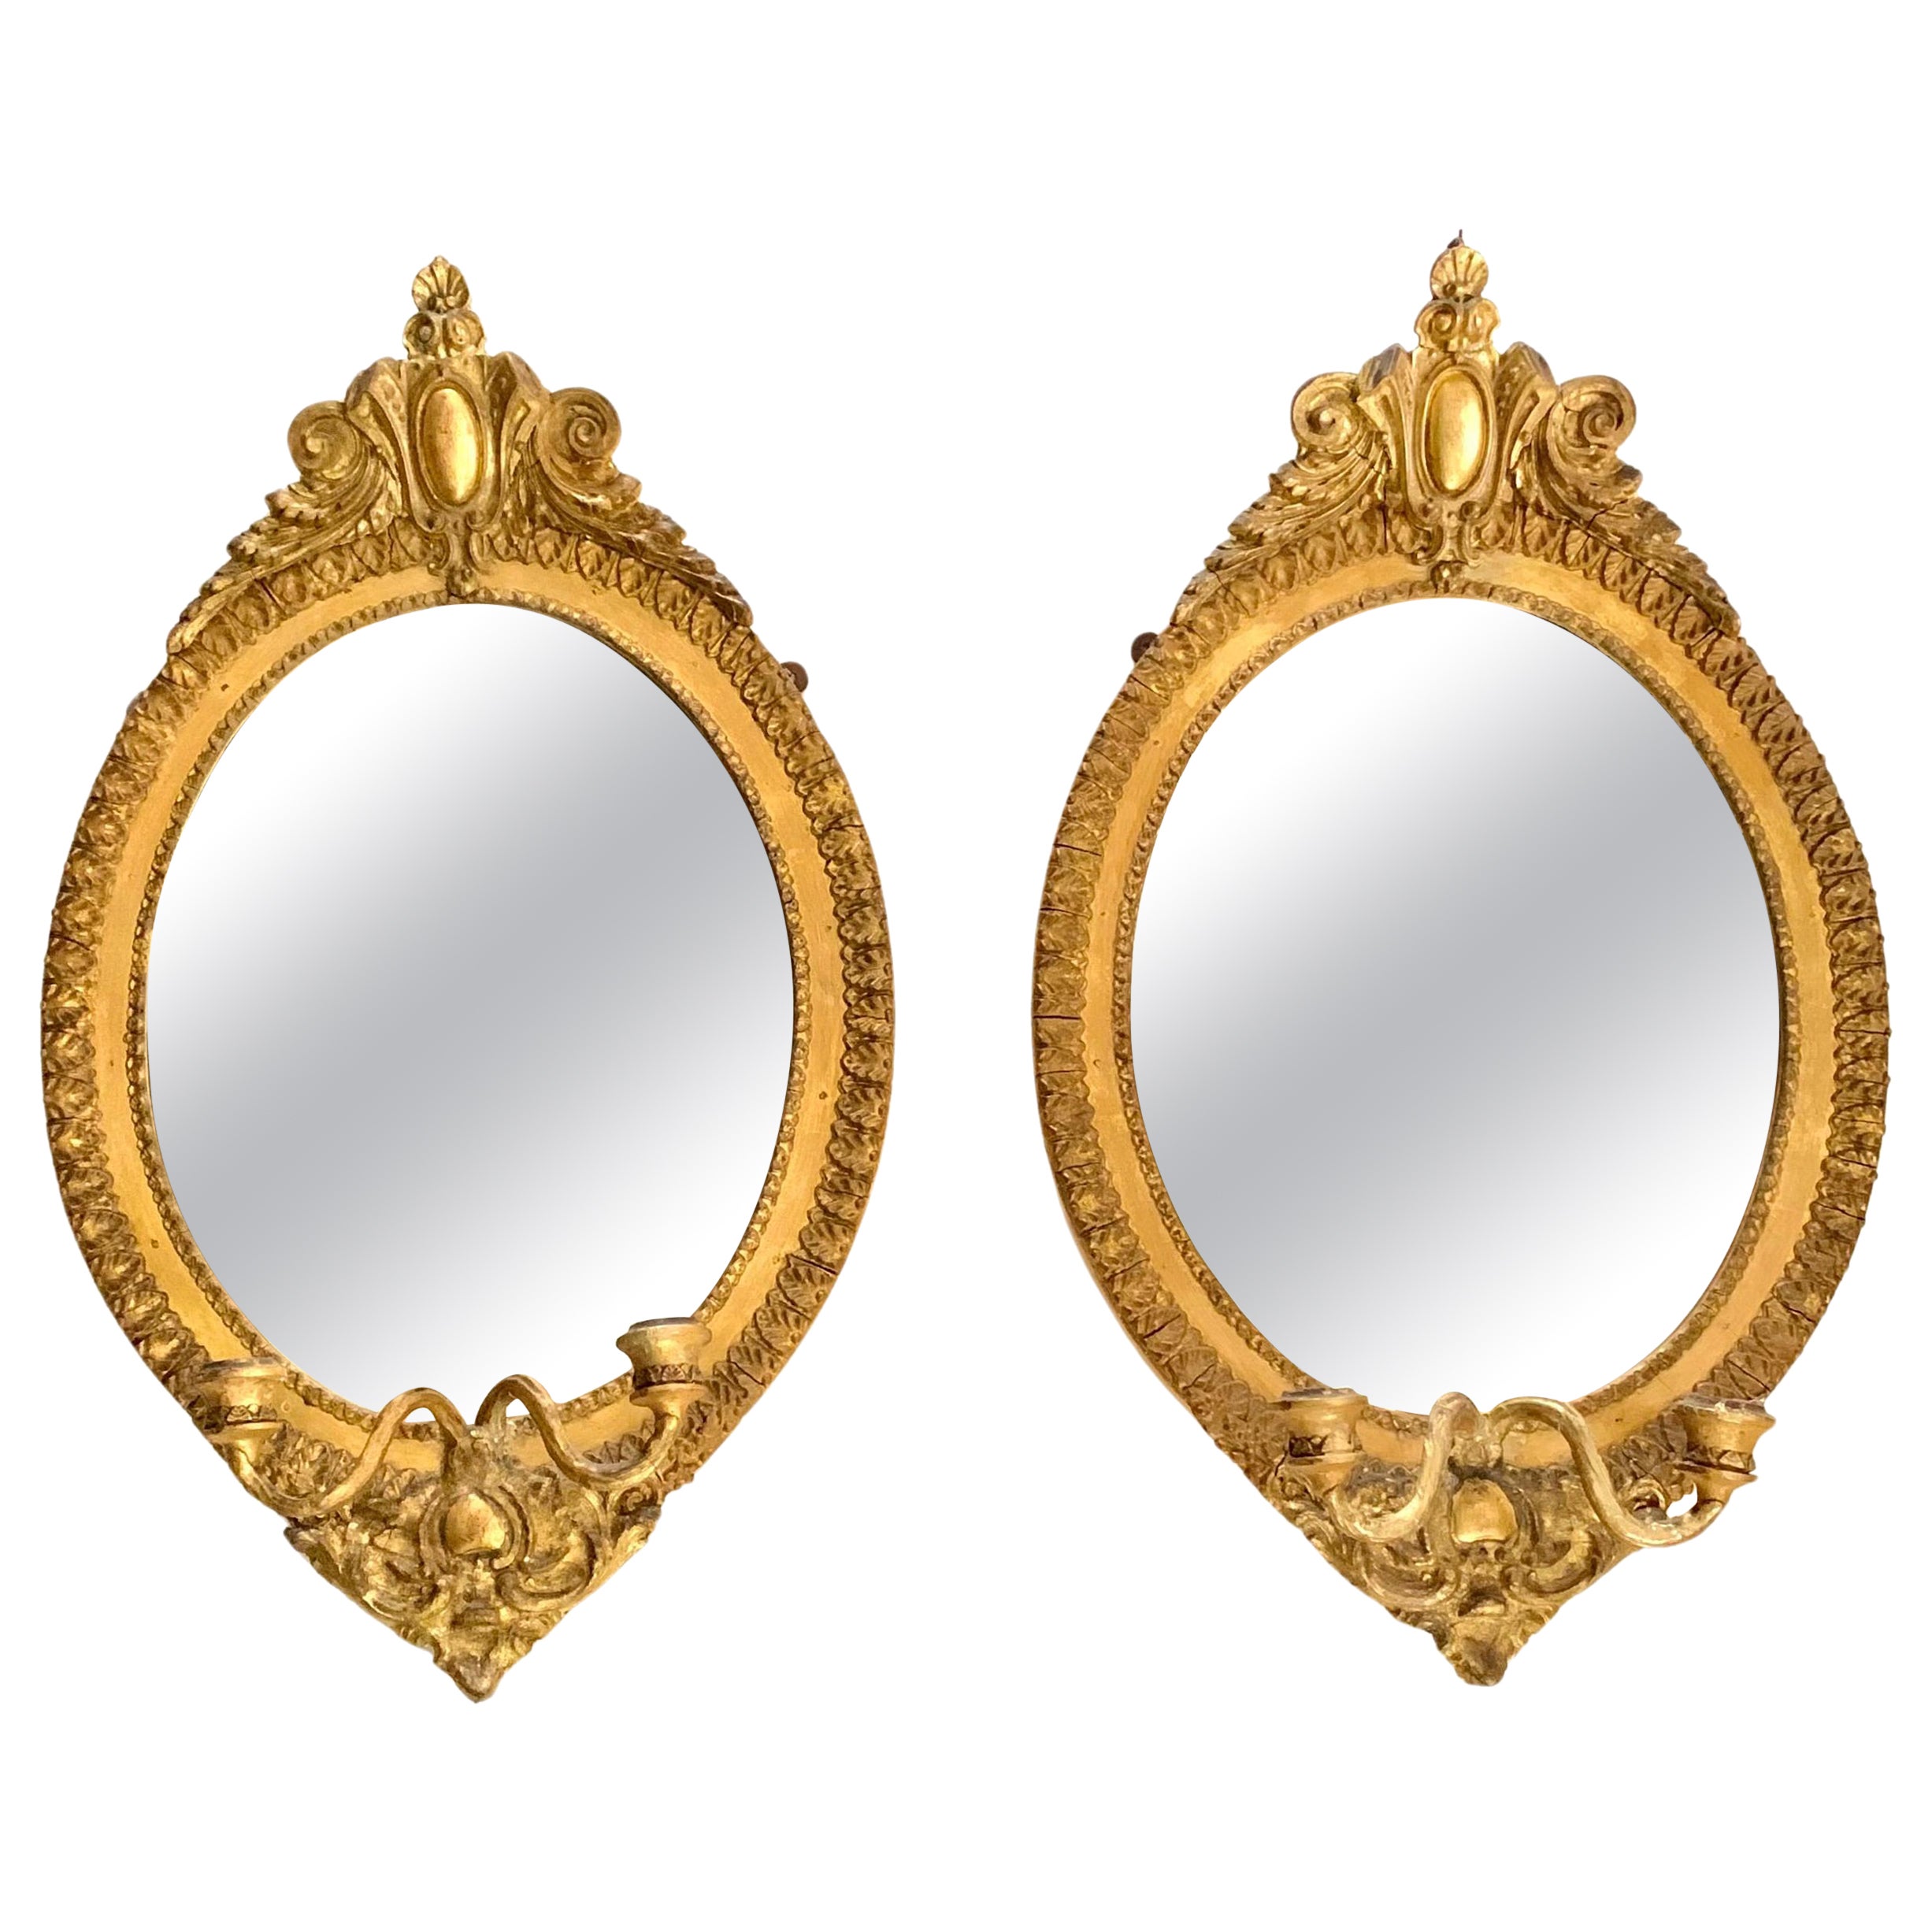 Pair 19th Century Neoclassical Style Giltwood Oval Girandole Mirrors For Sale